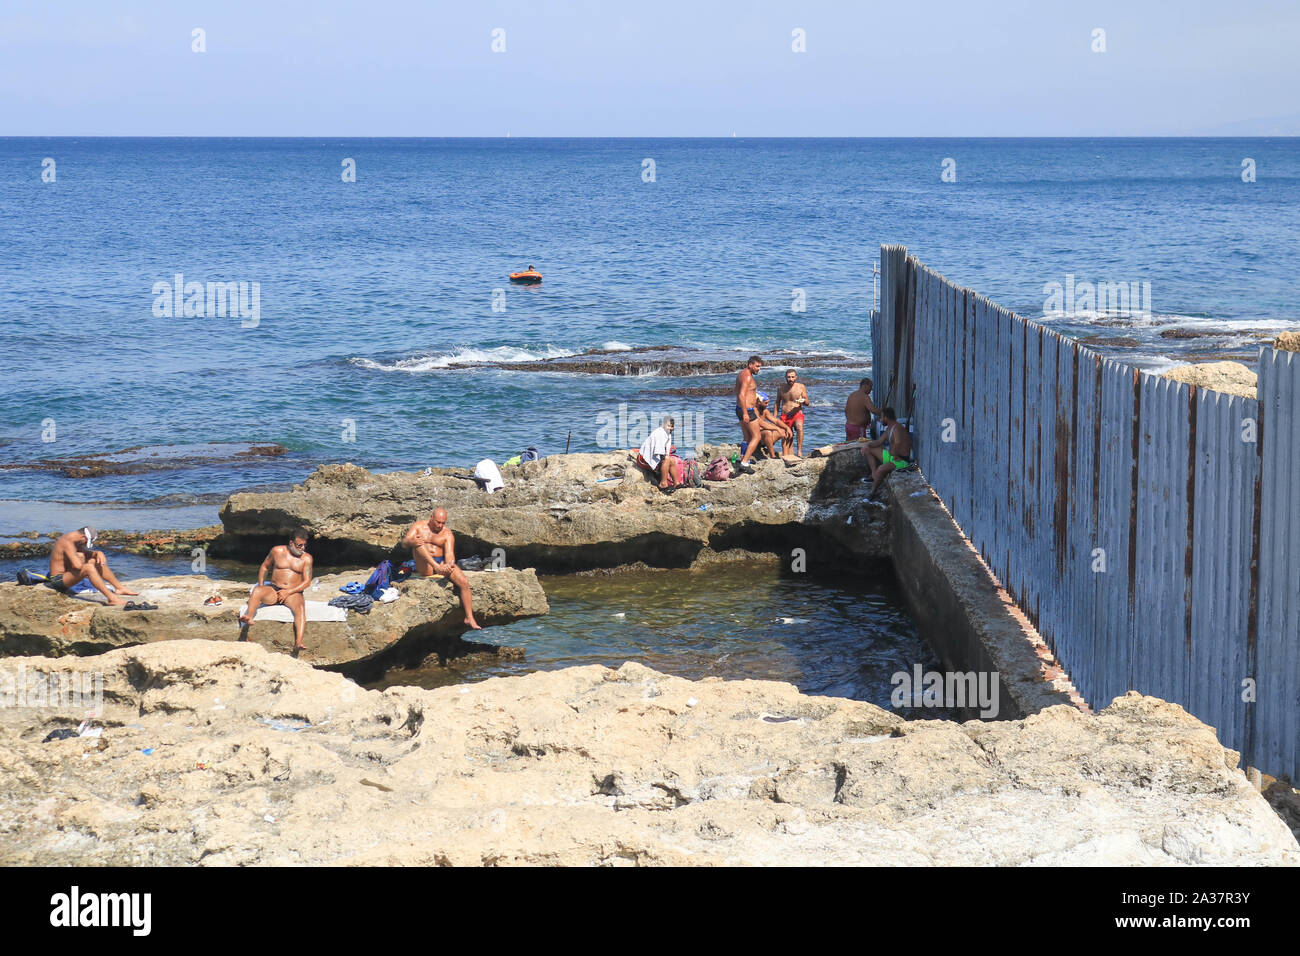 October 6, 2019, Beirut, Lebanon: People at the rocky seafront of the sea during the hot and humid day in Beirut. (Credit Image: © Amer Ghazzal/SOPA Images via ZUMA Wire) Stock Photo